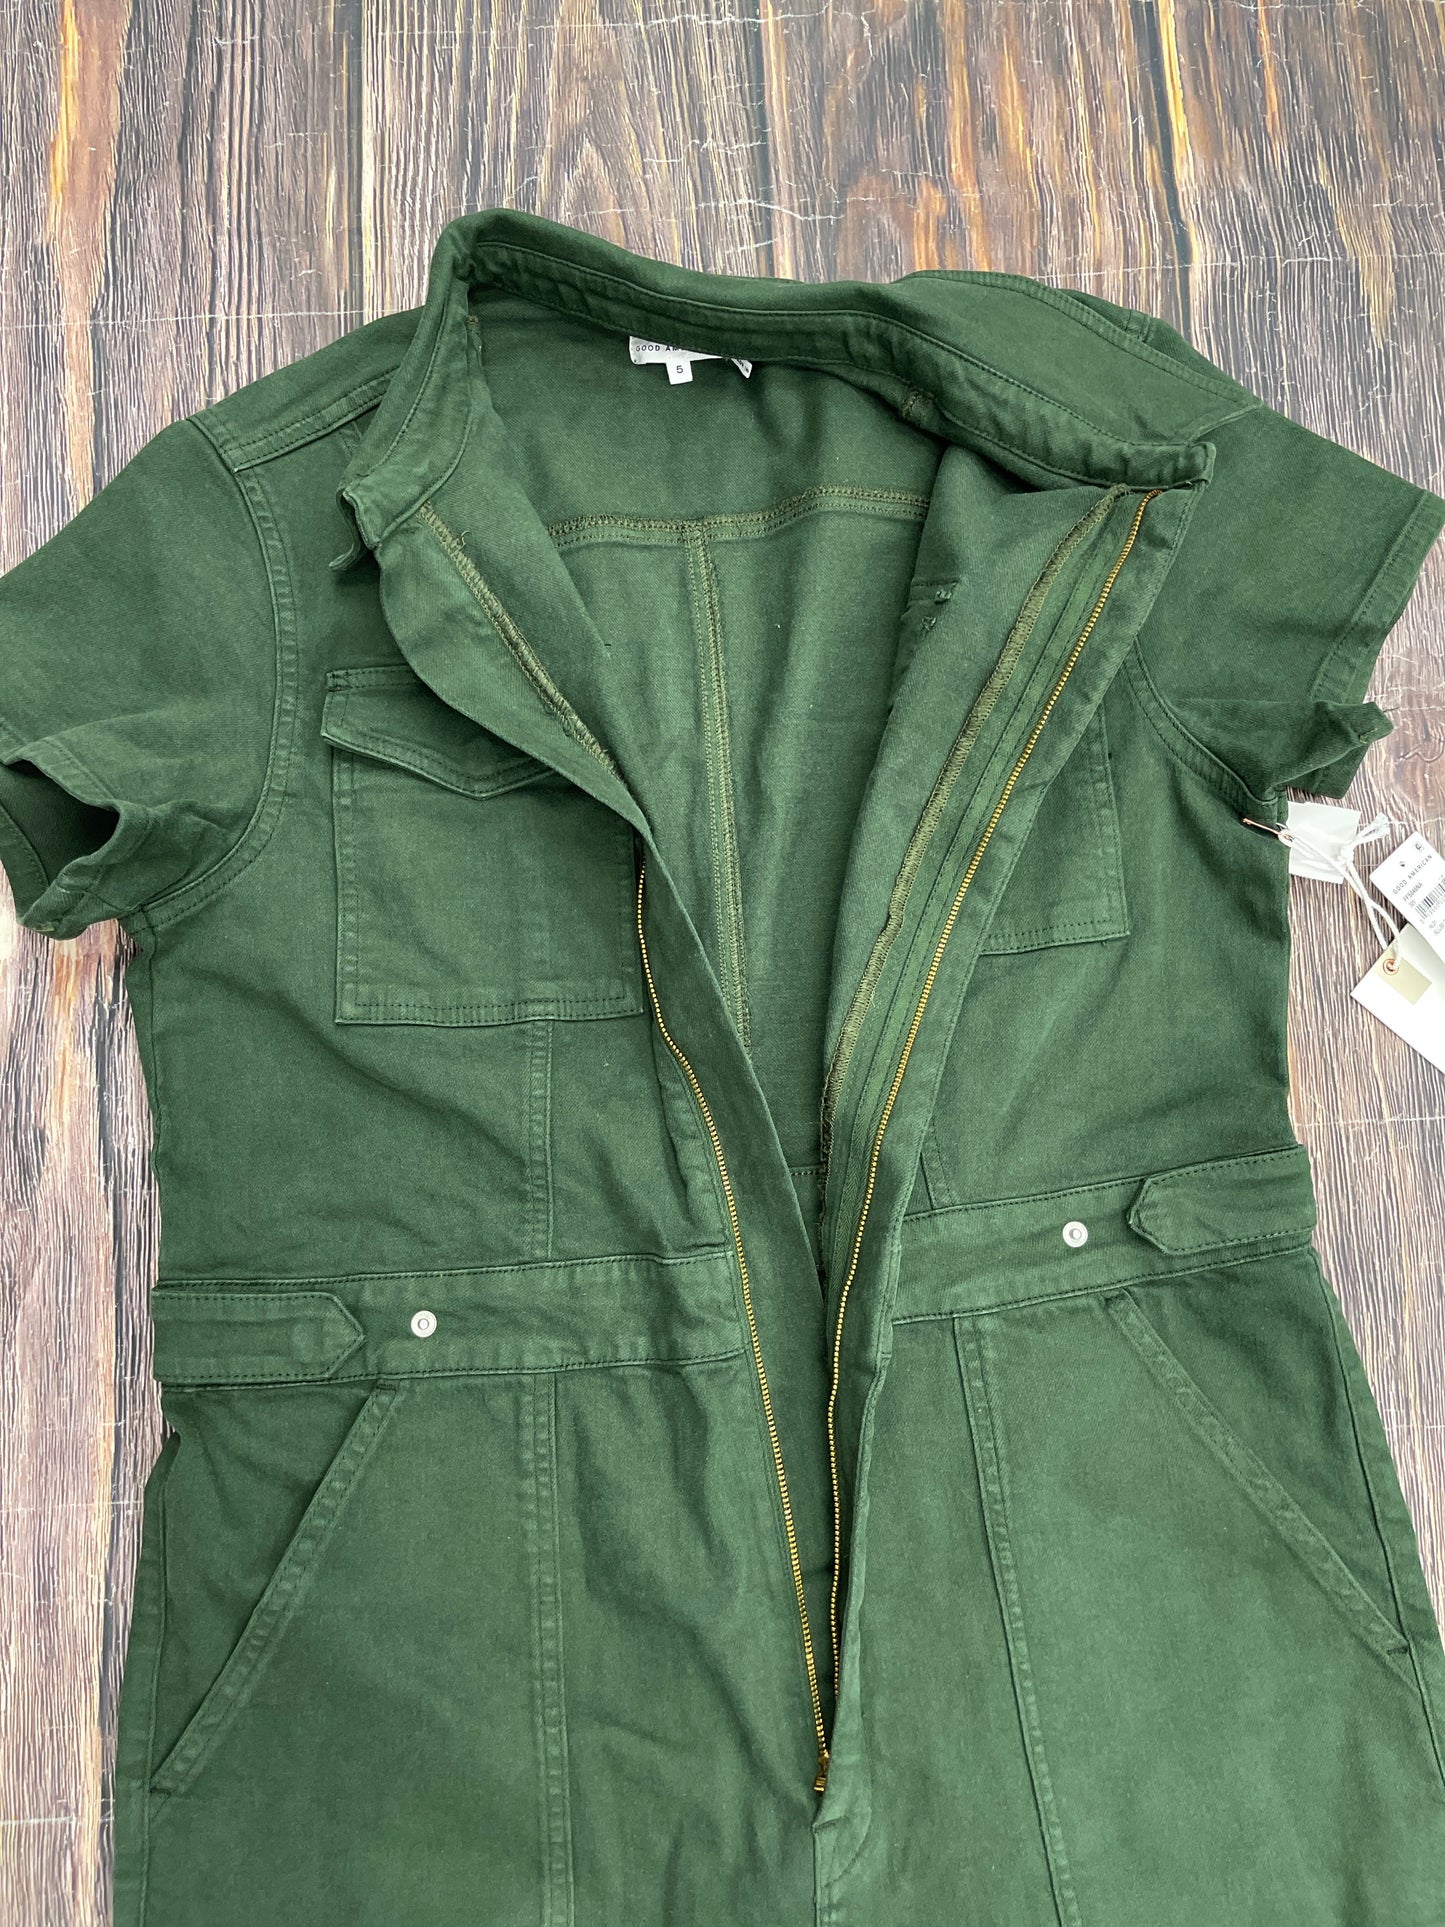 Green Jumpsuit Good American, Size 1x